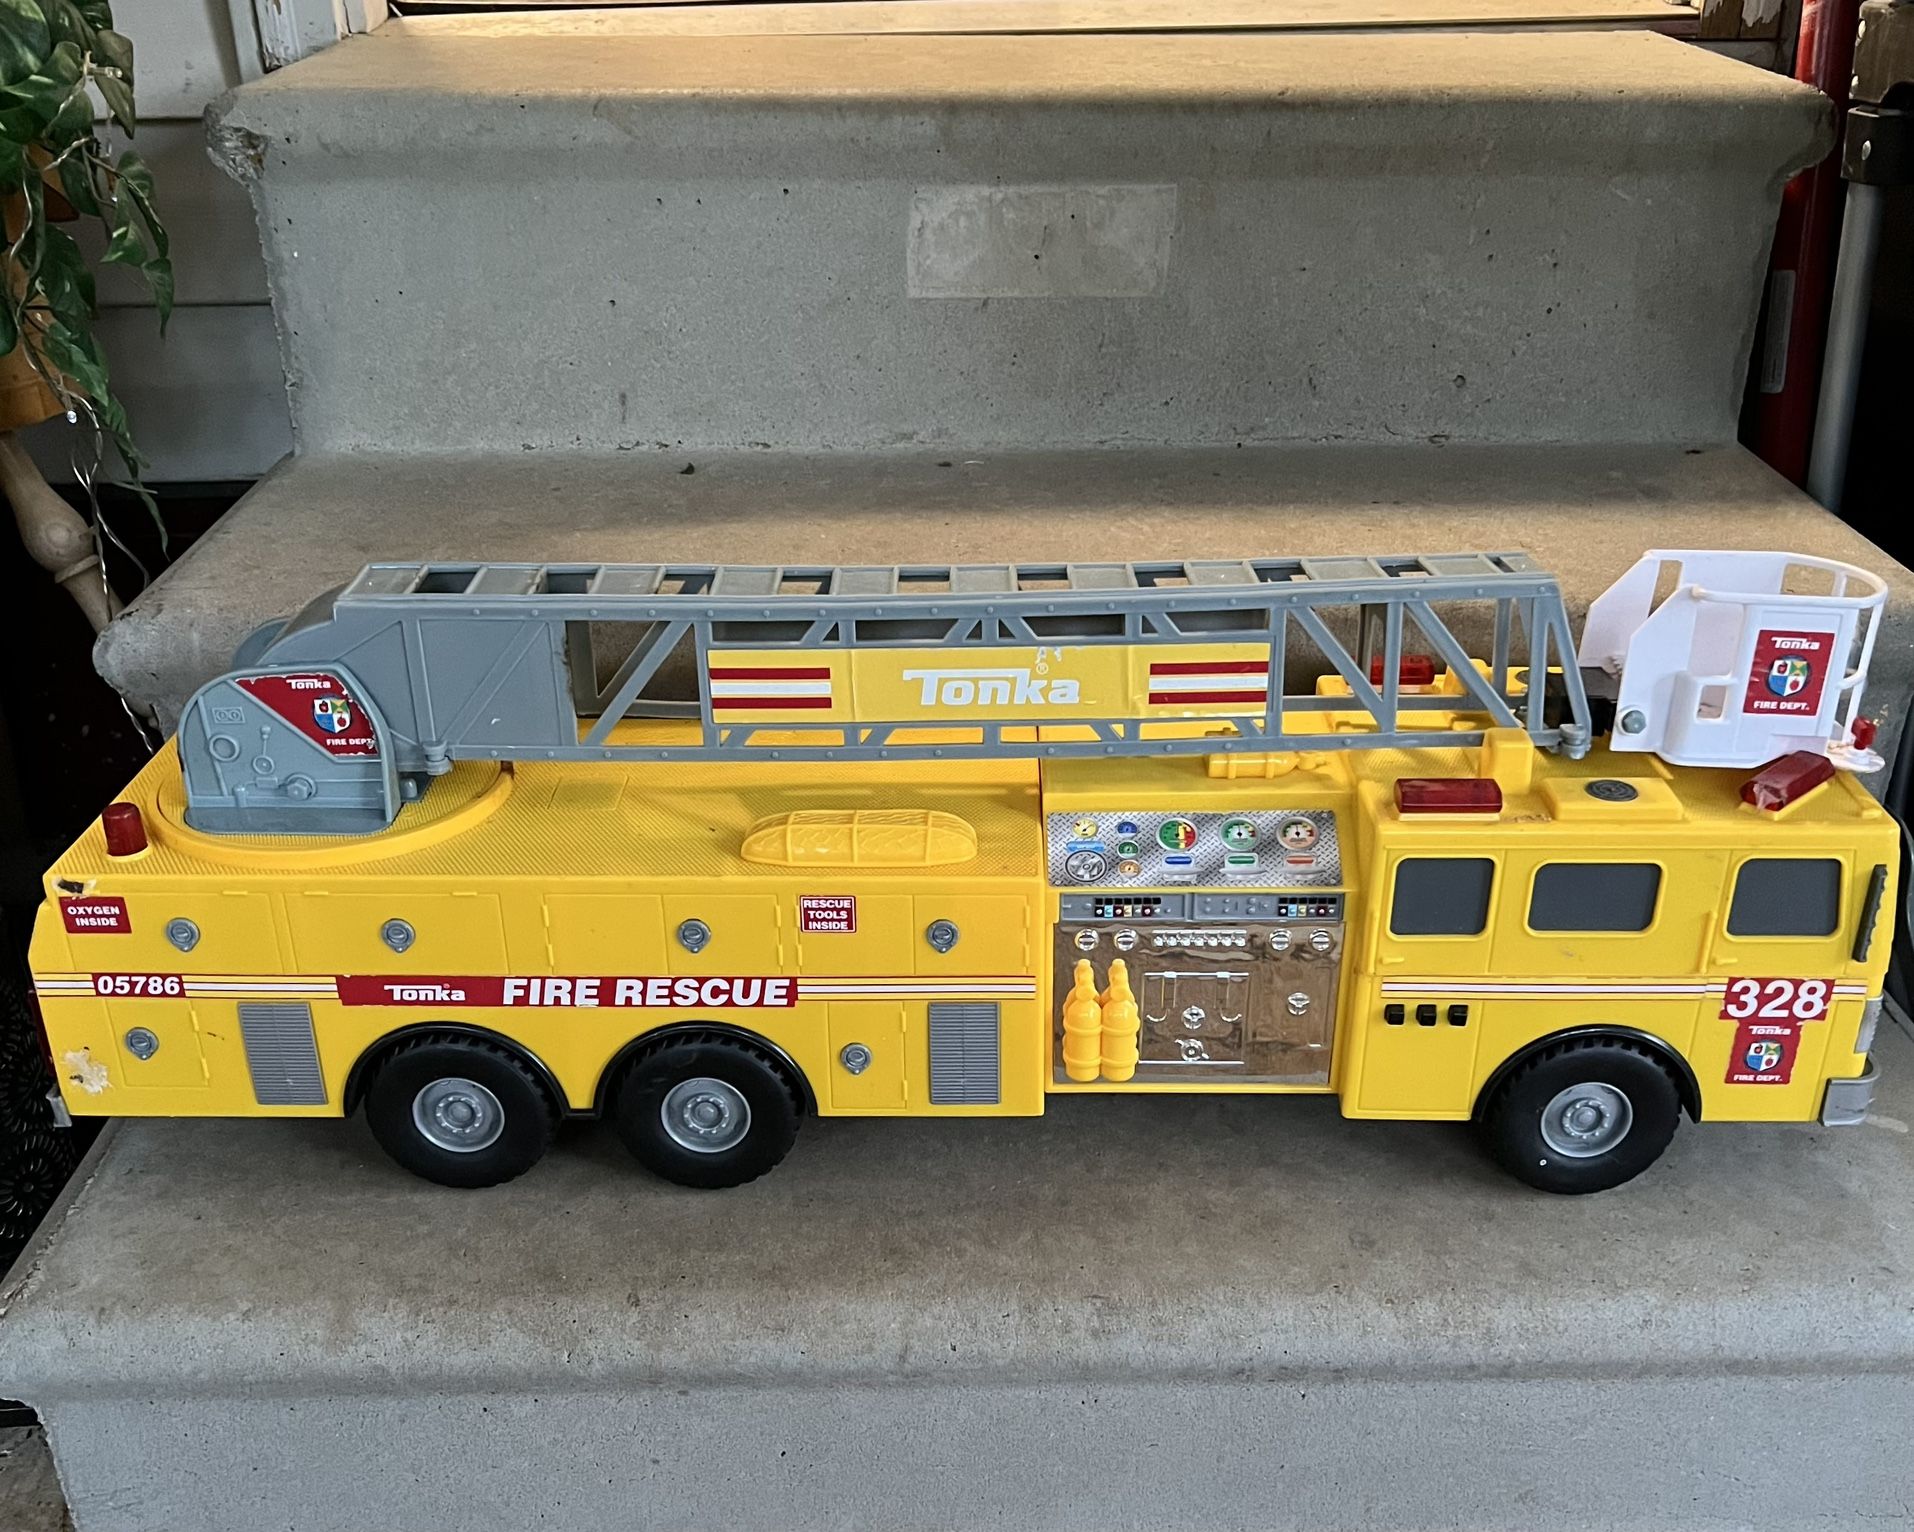 2011 HASBRO 31" TONKA FIRE RESCUE TRUCK YELLOW RED 05786 328 SOUNDS LIGHT #06730